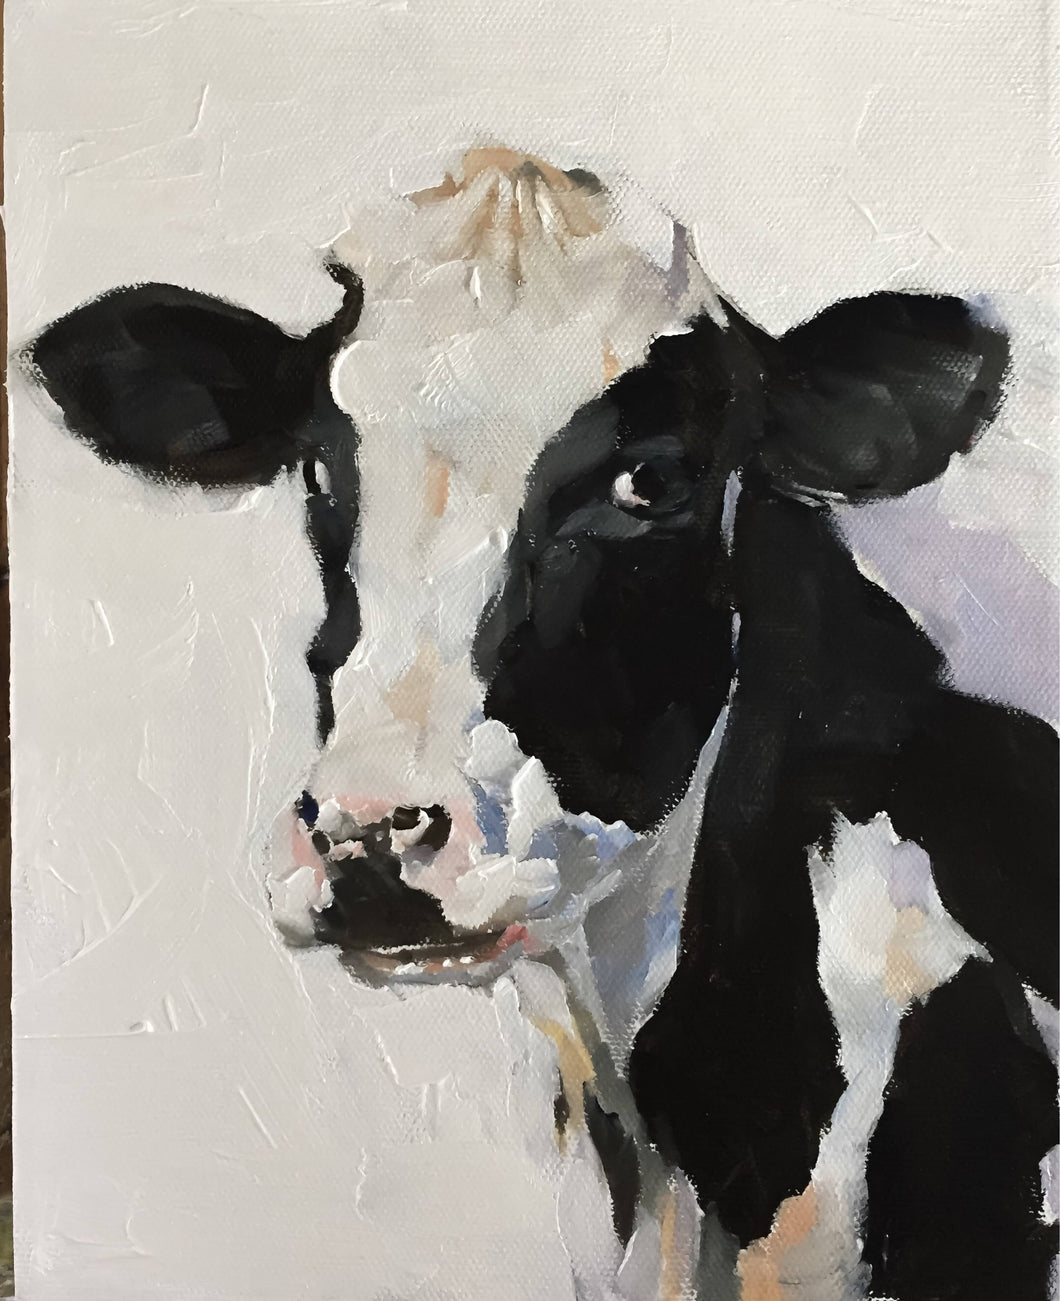 Cow Painting, PRINTS, Canvas, Posters, Commissions, professional art - Fine Art - from original oil painting by James Coates